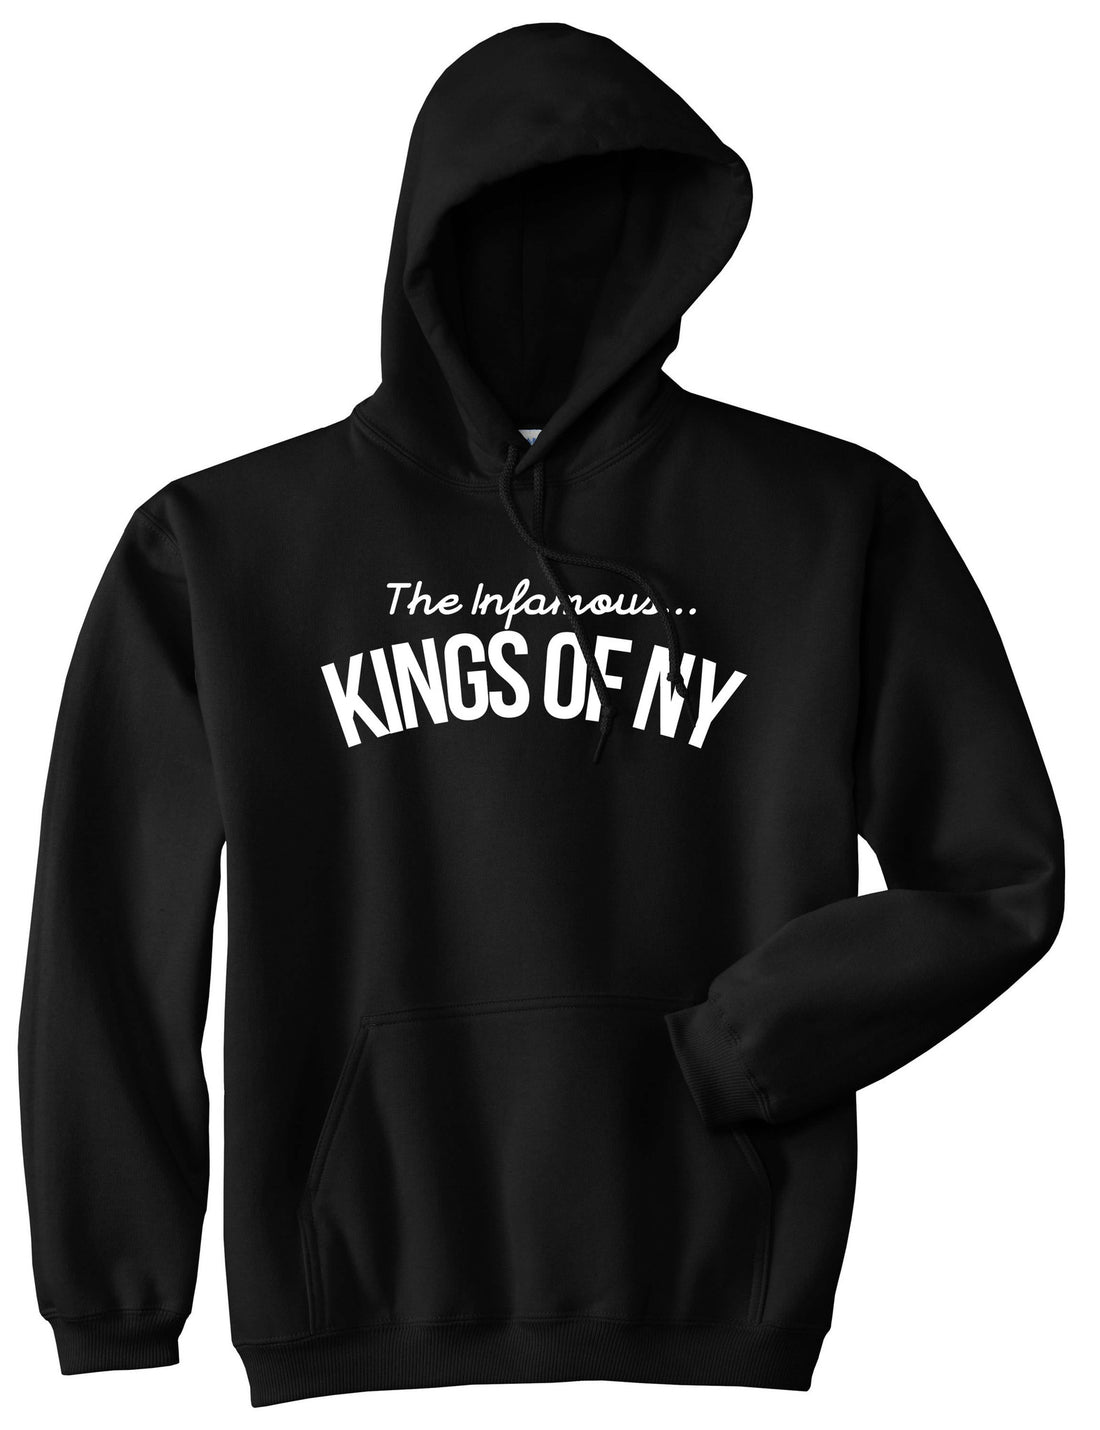 The Infamous Kings Of NY Pullover Hoodie in Black By Kings Of NY